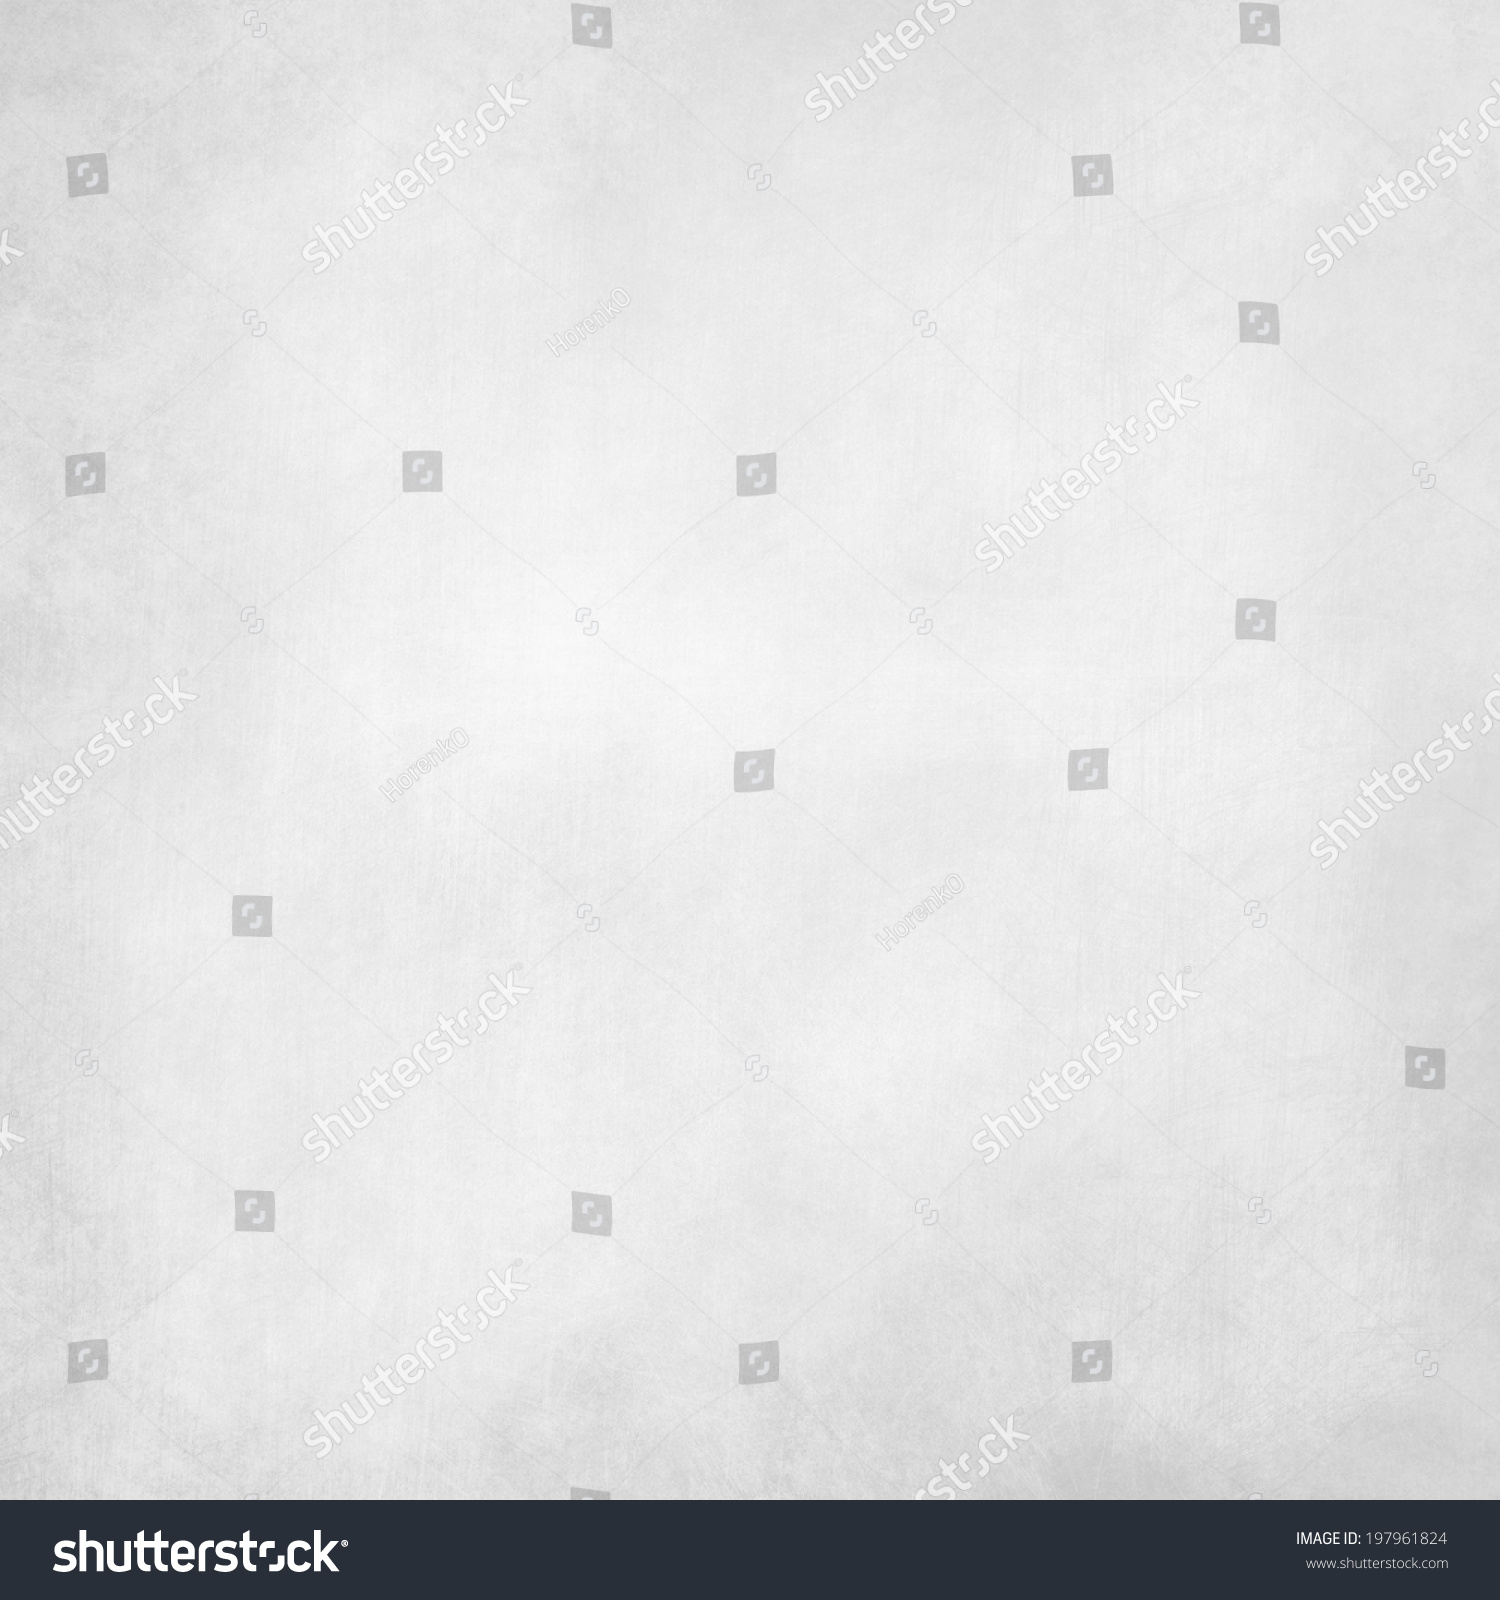 abstract black background, old black vignette border frame white gray background, vintage grunge background texture design, black and white monochrome background for printing brochures or papers #197961824